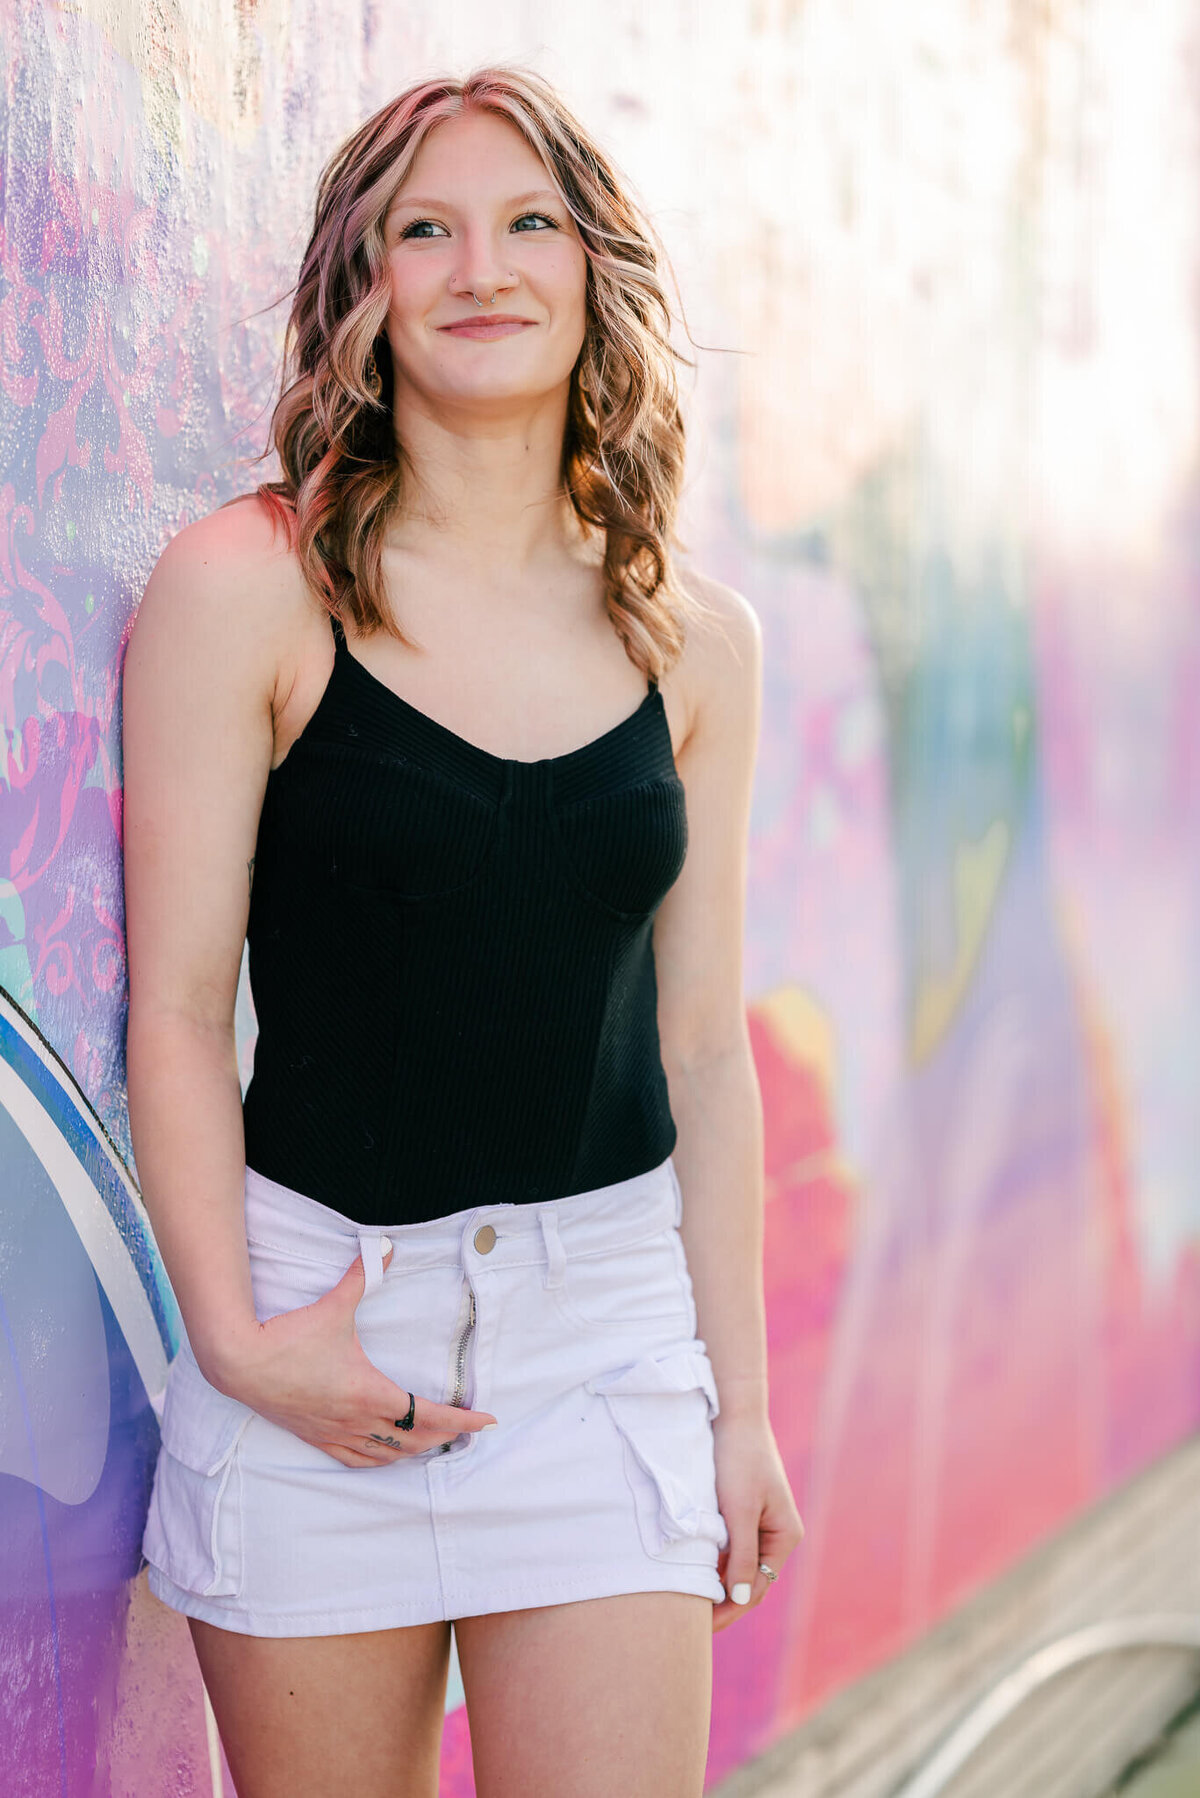 A high school senior leans against a mural in Norfolk's Neon District. She is holding back a laugh white she hooks her hand in her white denim skirt's belt loop.